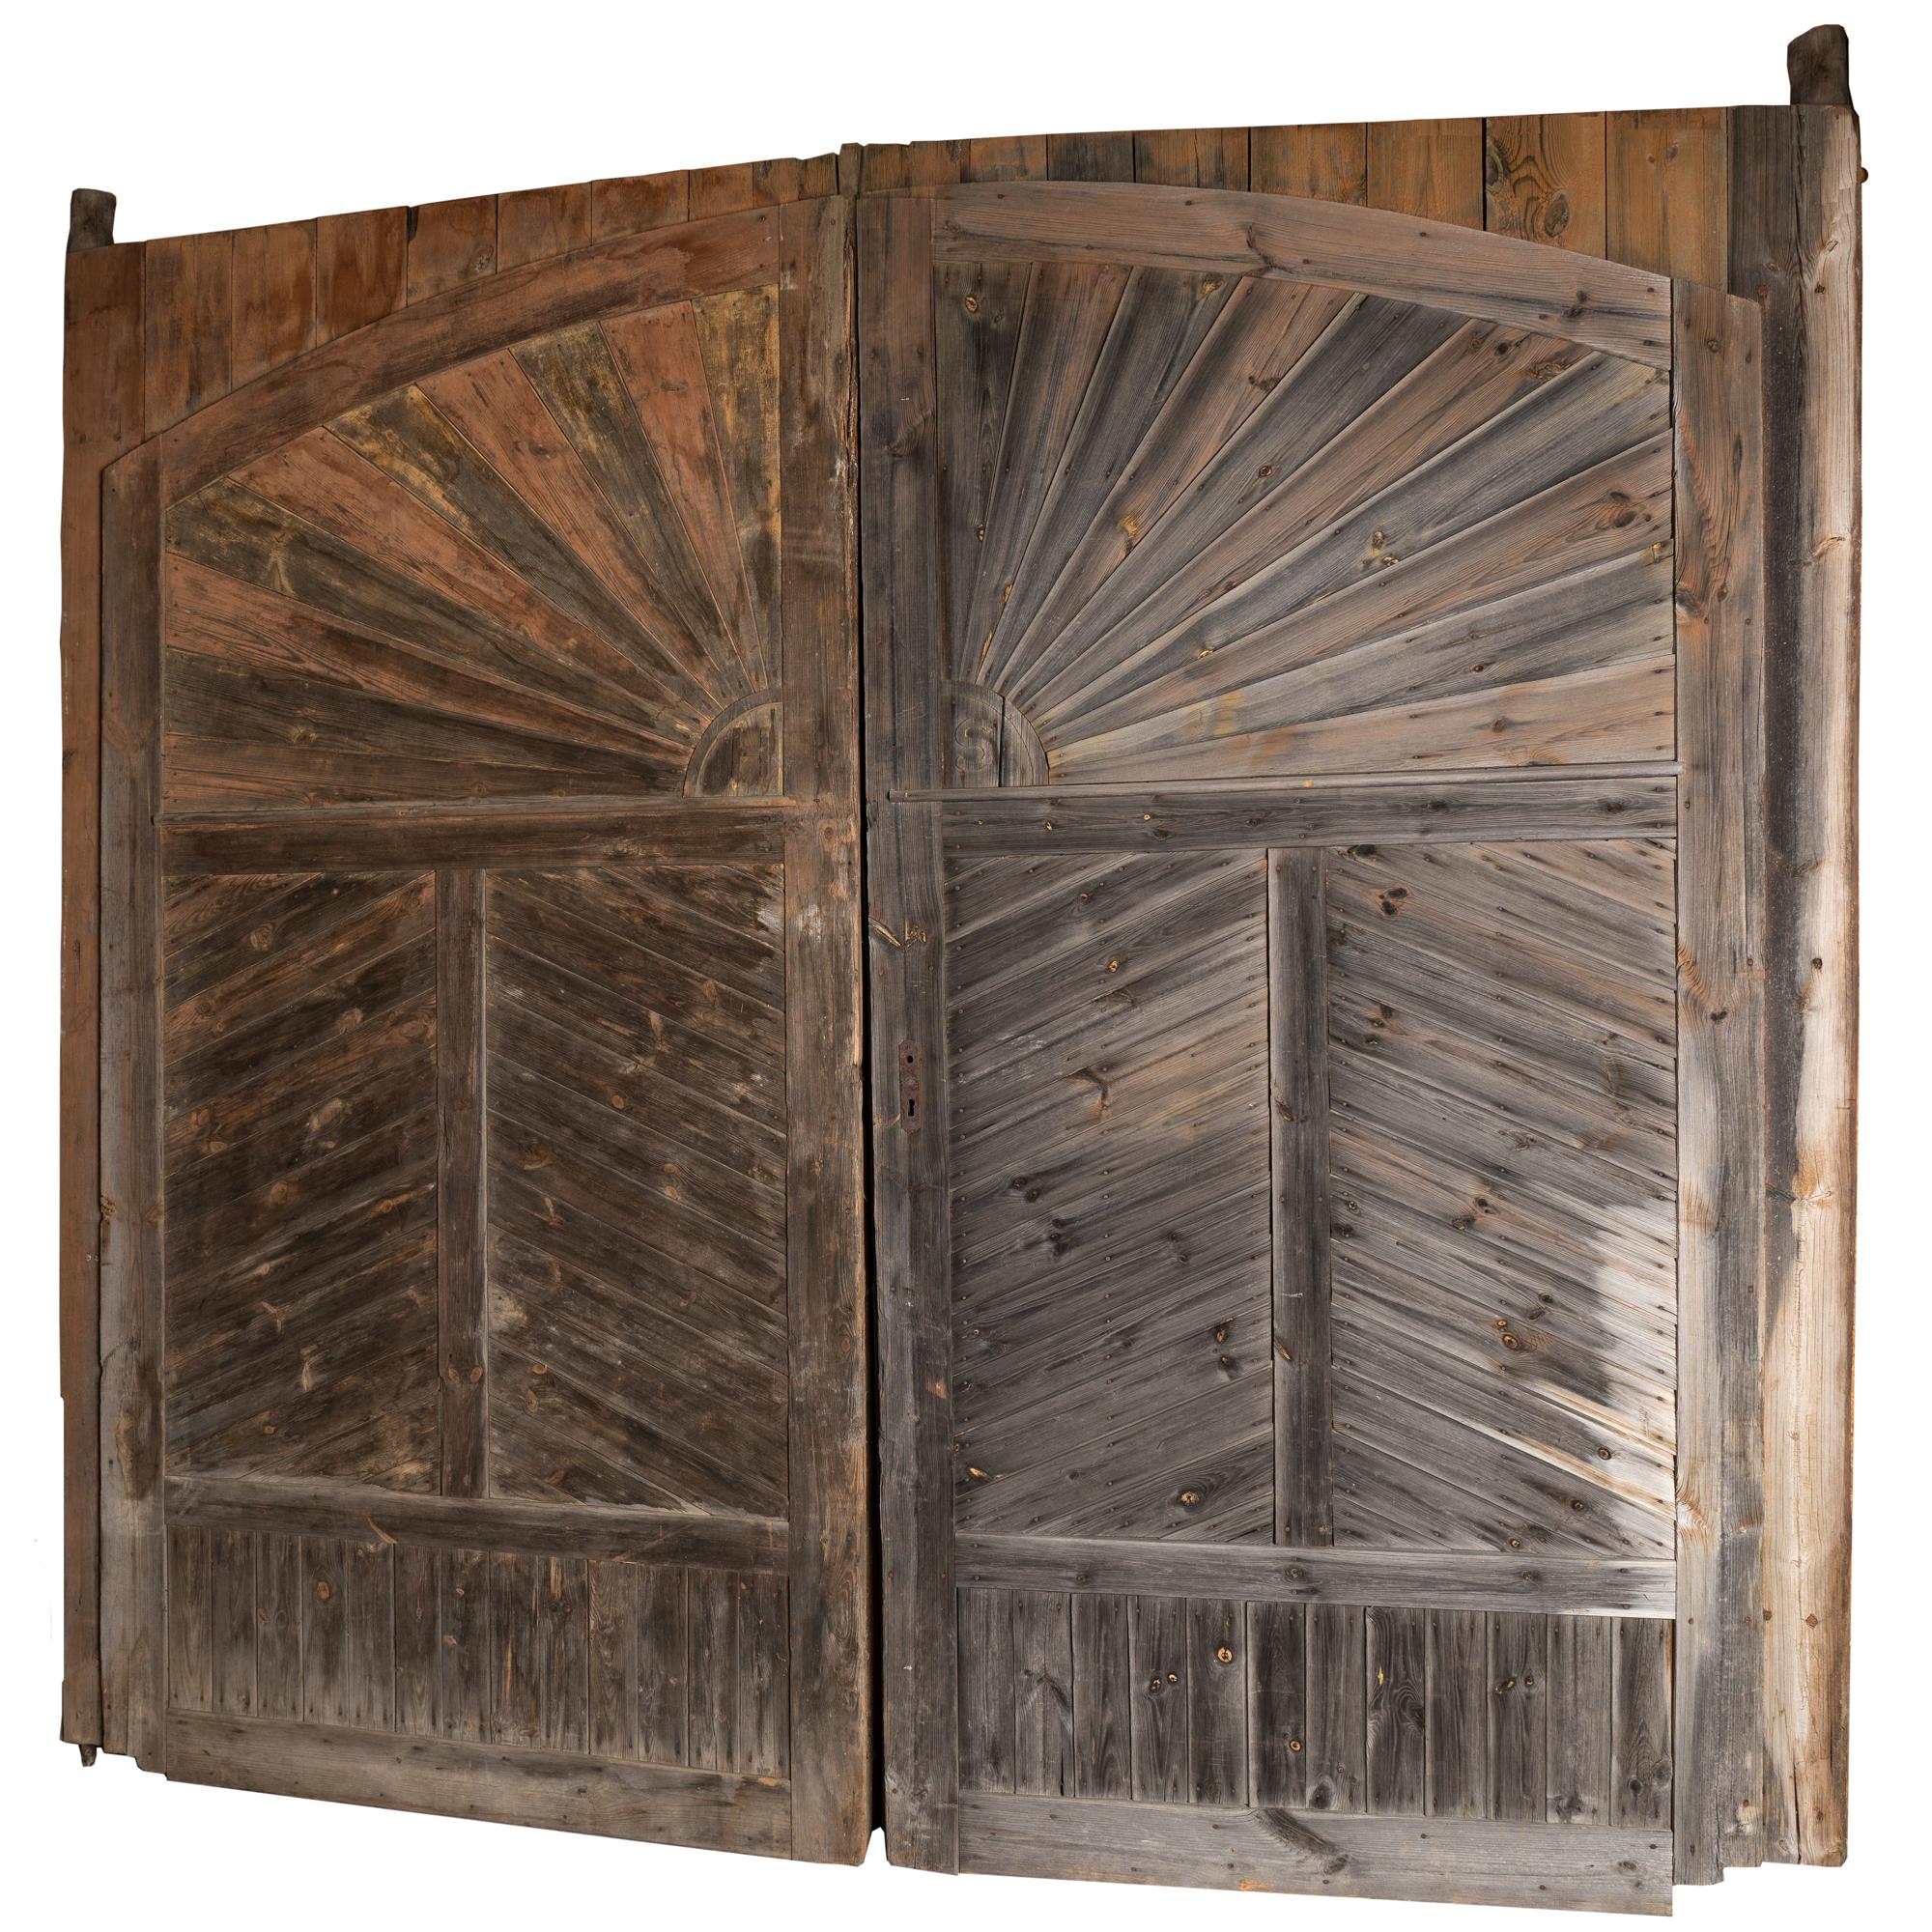 This large pair of doors make an impressive architectural statement standing 10' tall with a sunburst pattern in the upper section. Within the center of the sun pattern you see the monogram of HS. The worn patina of the grey weathered wood adds to